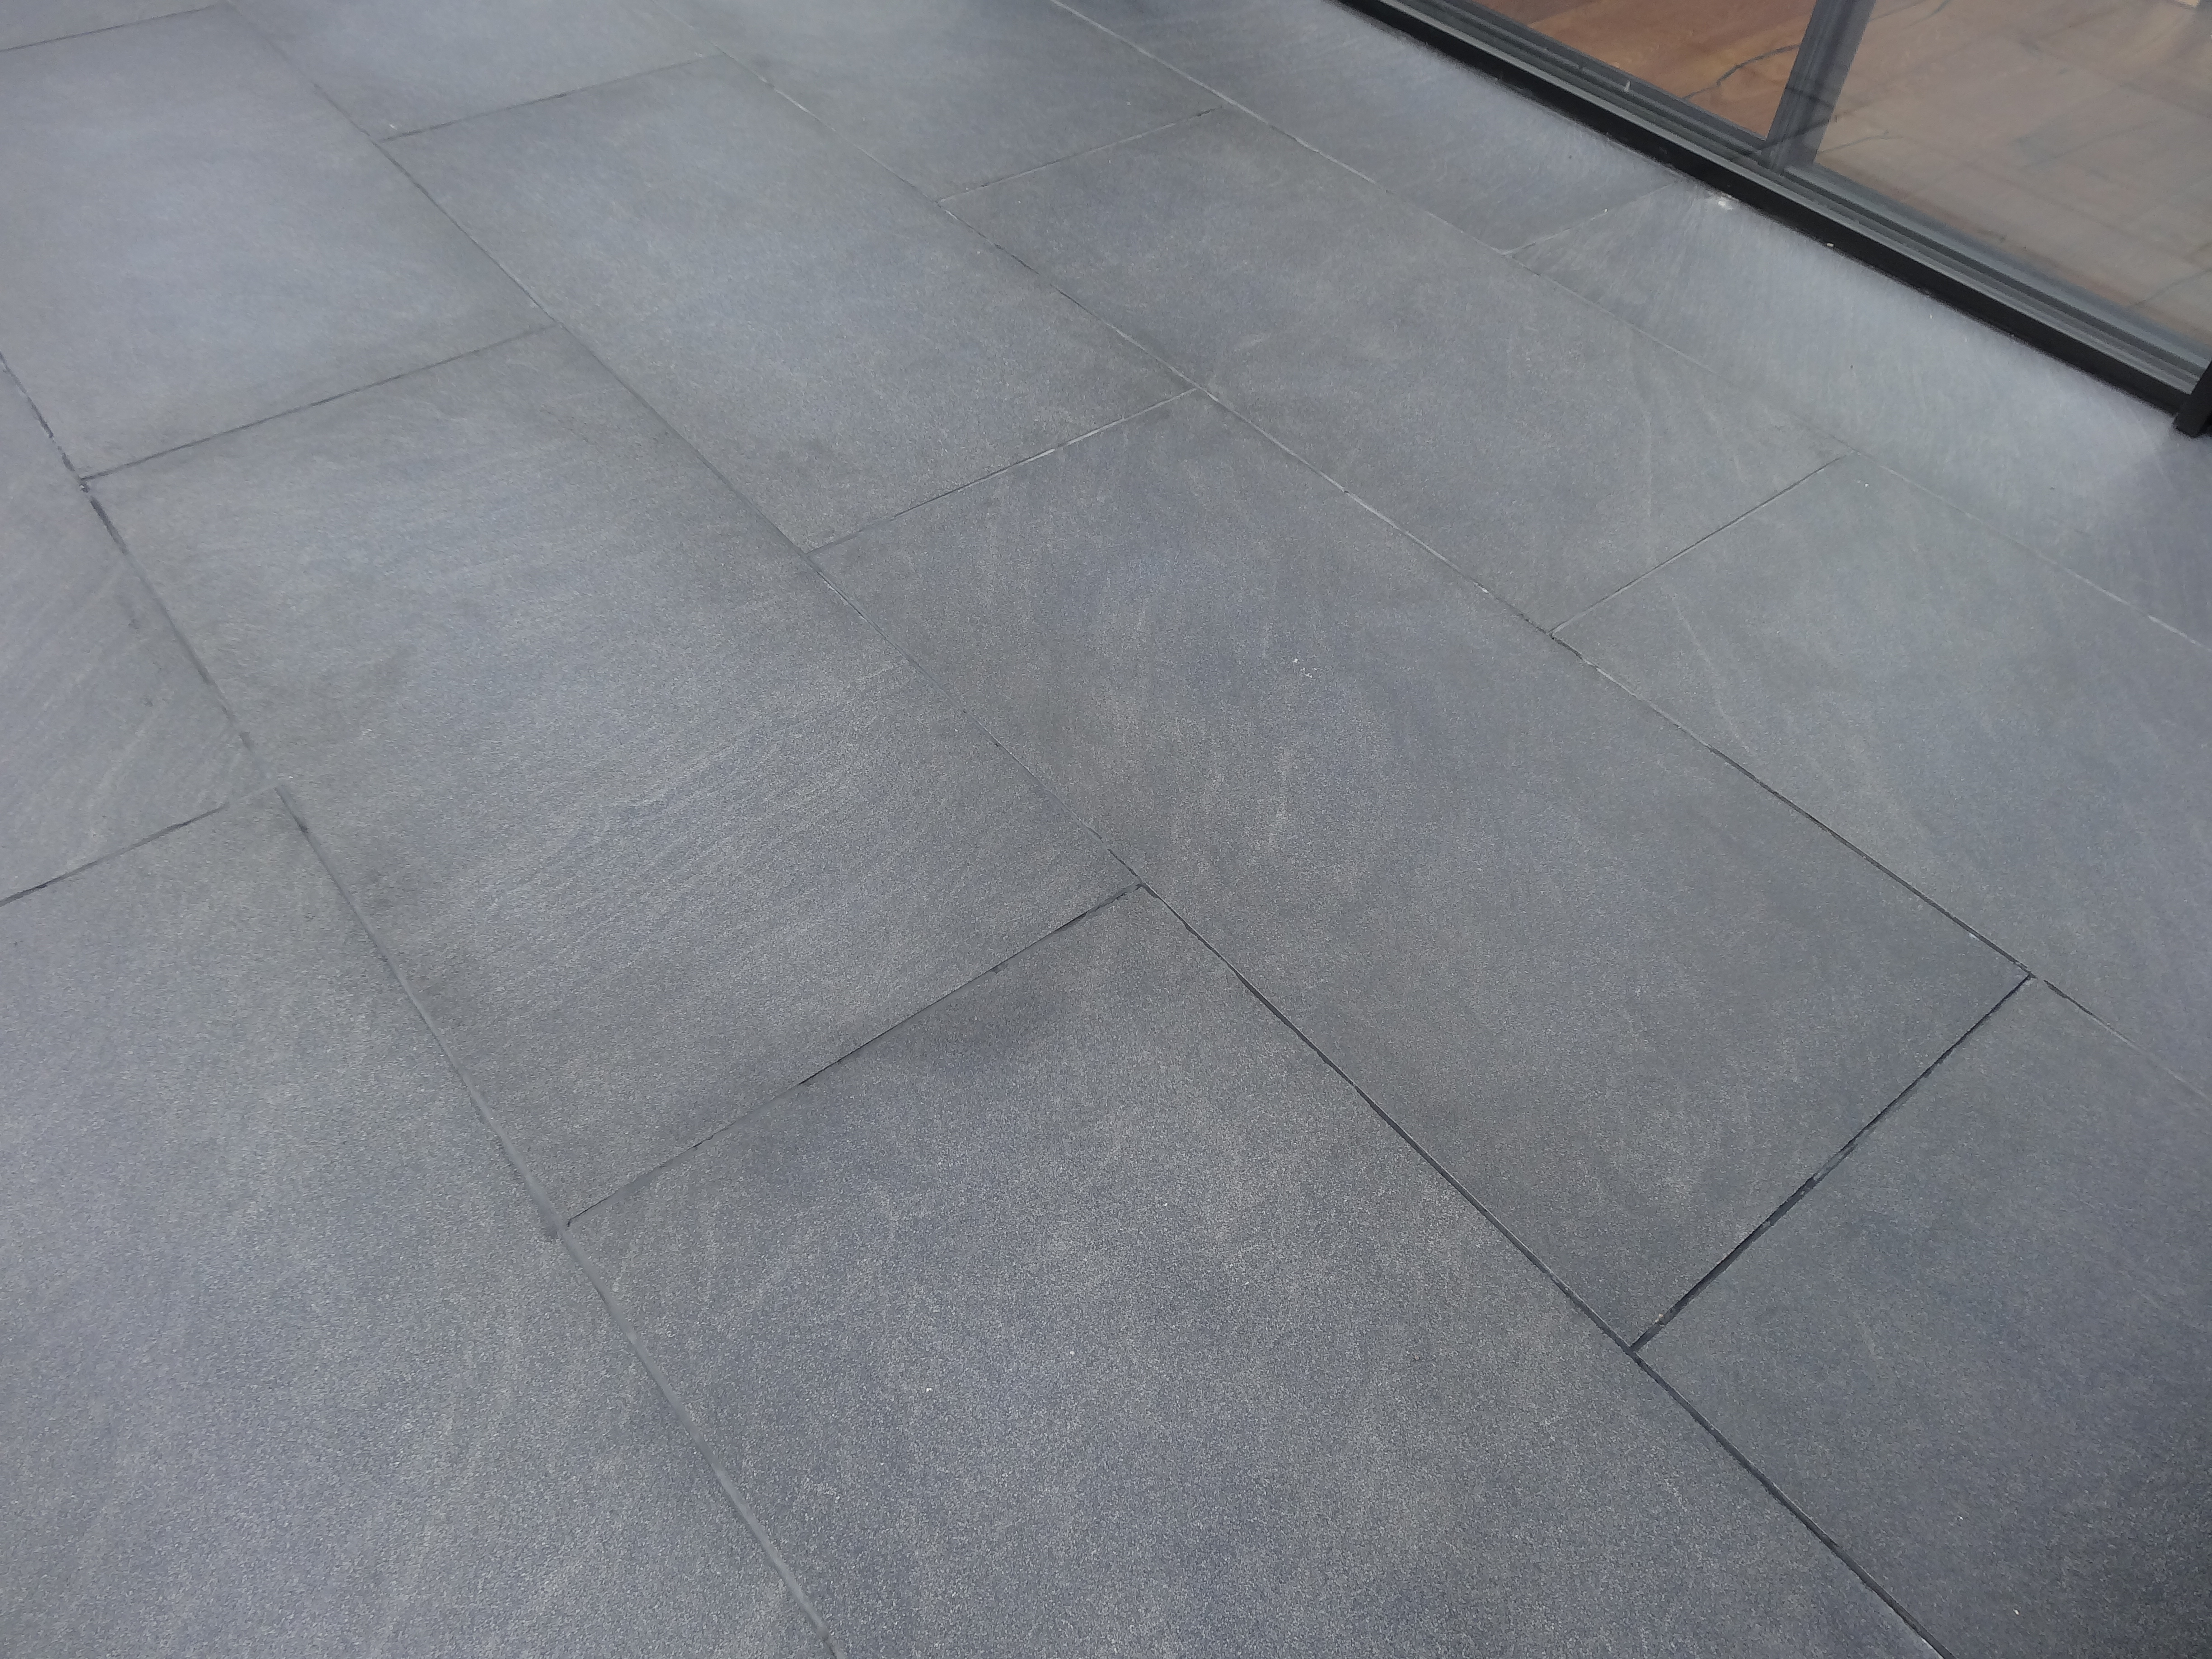 Coursed staggered bond paving